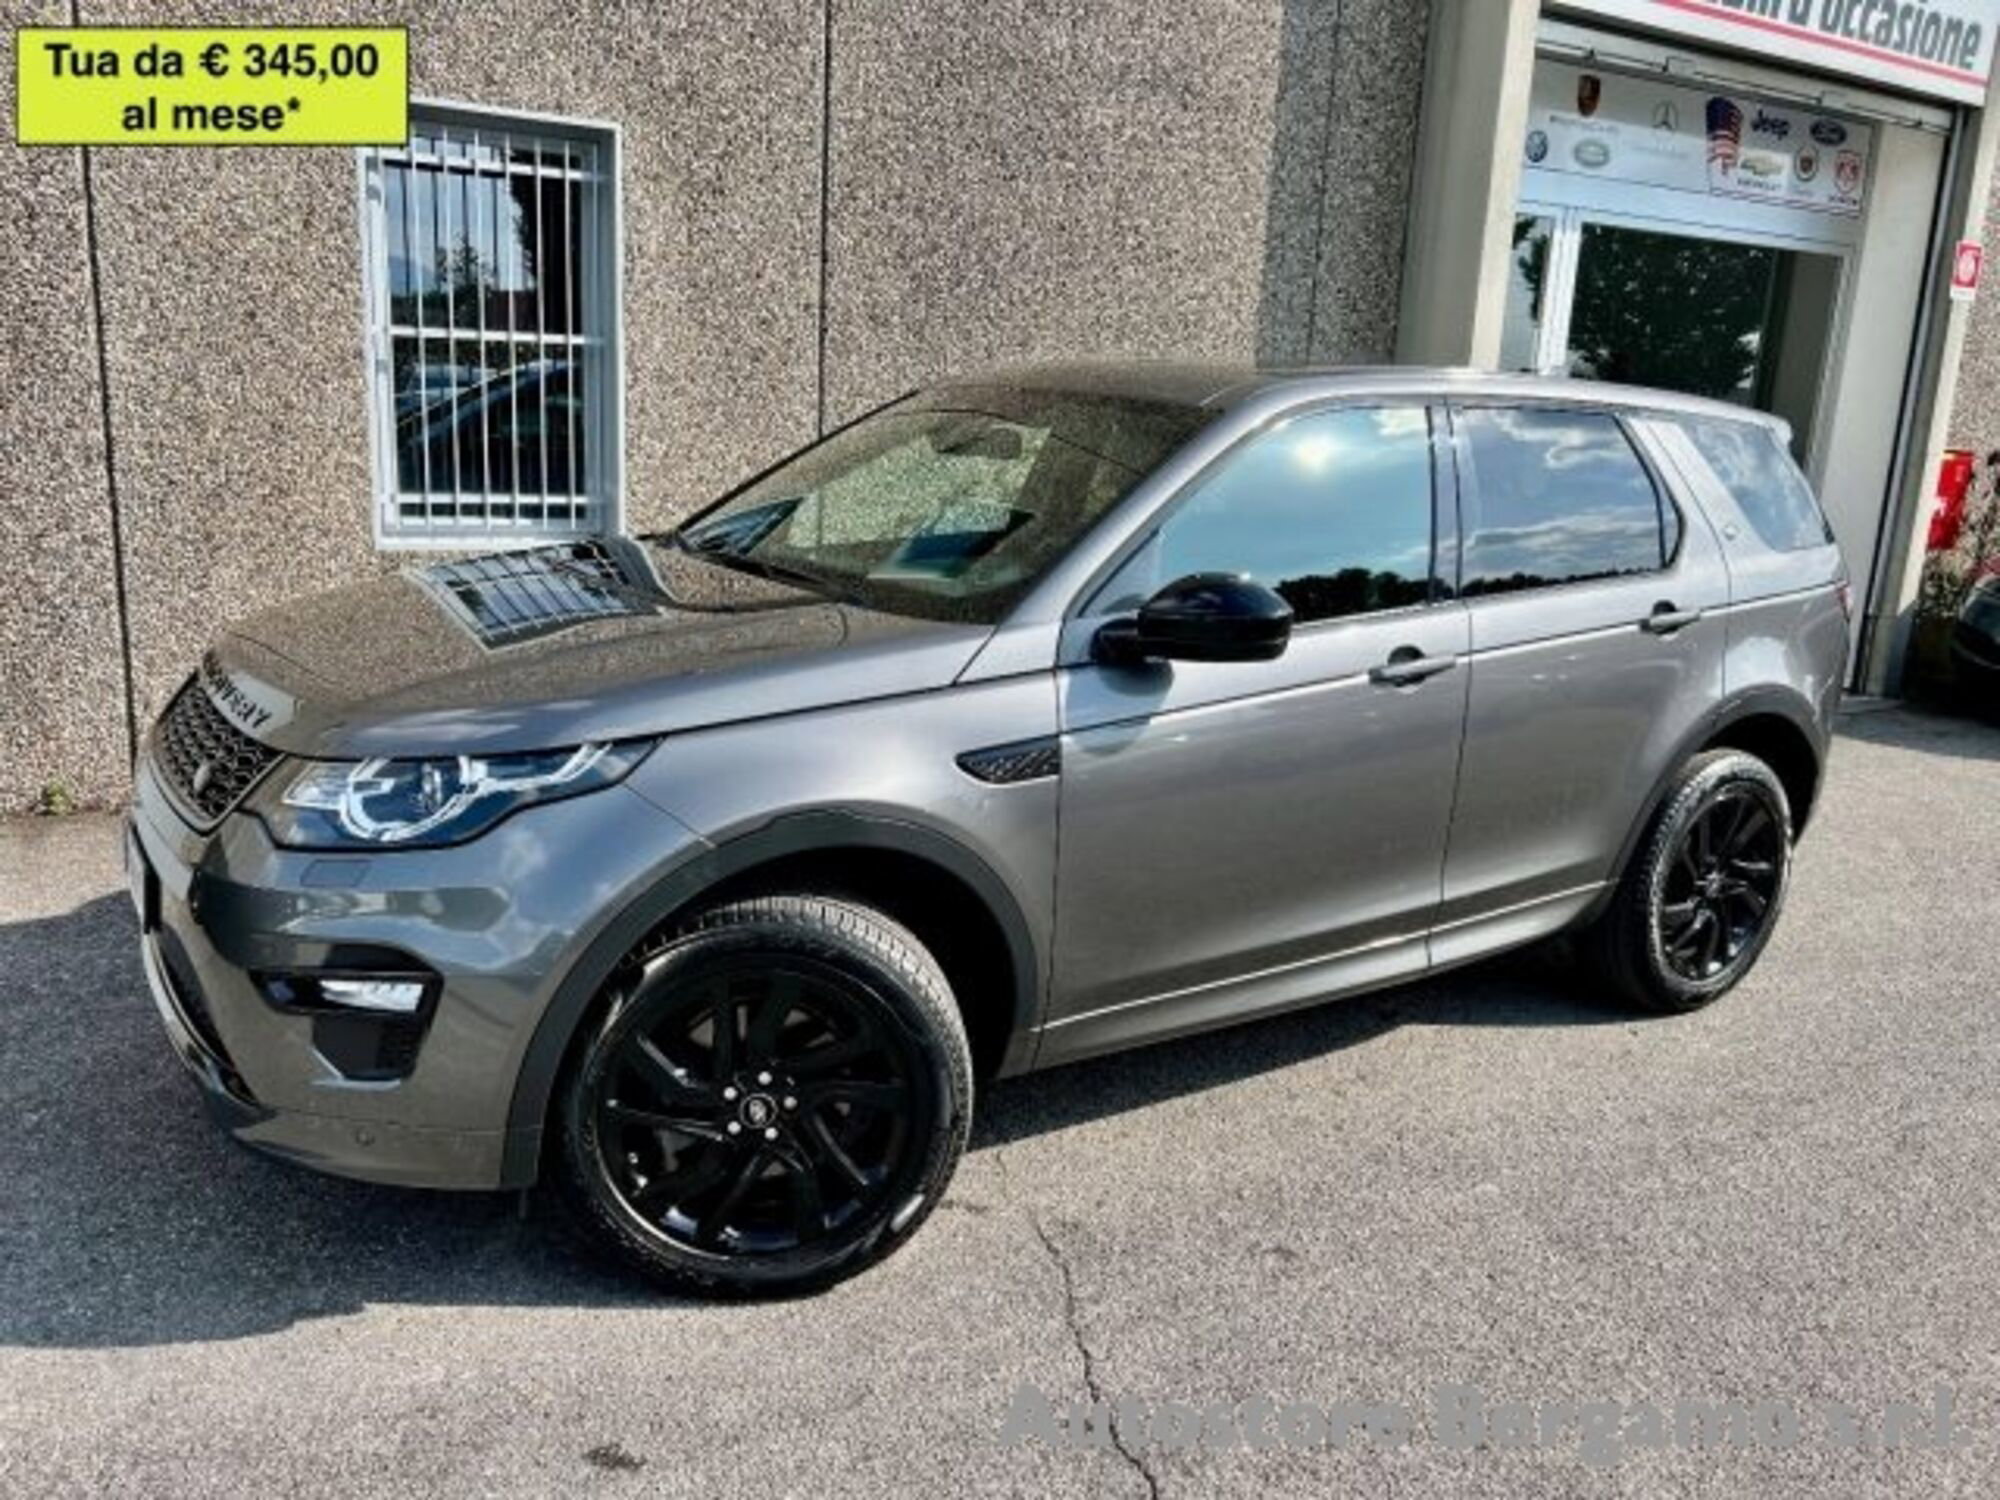 Land Rover Discovery Sport 2.0 TD4 150 CV HSE 